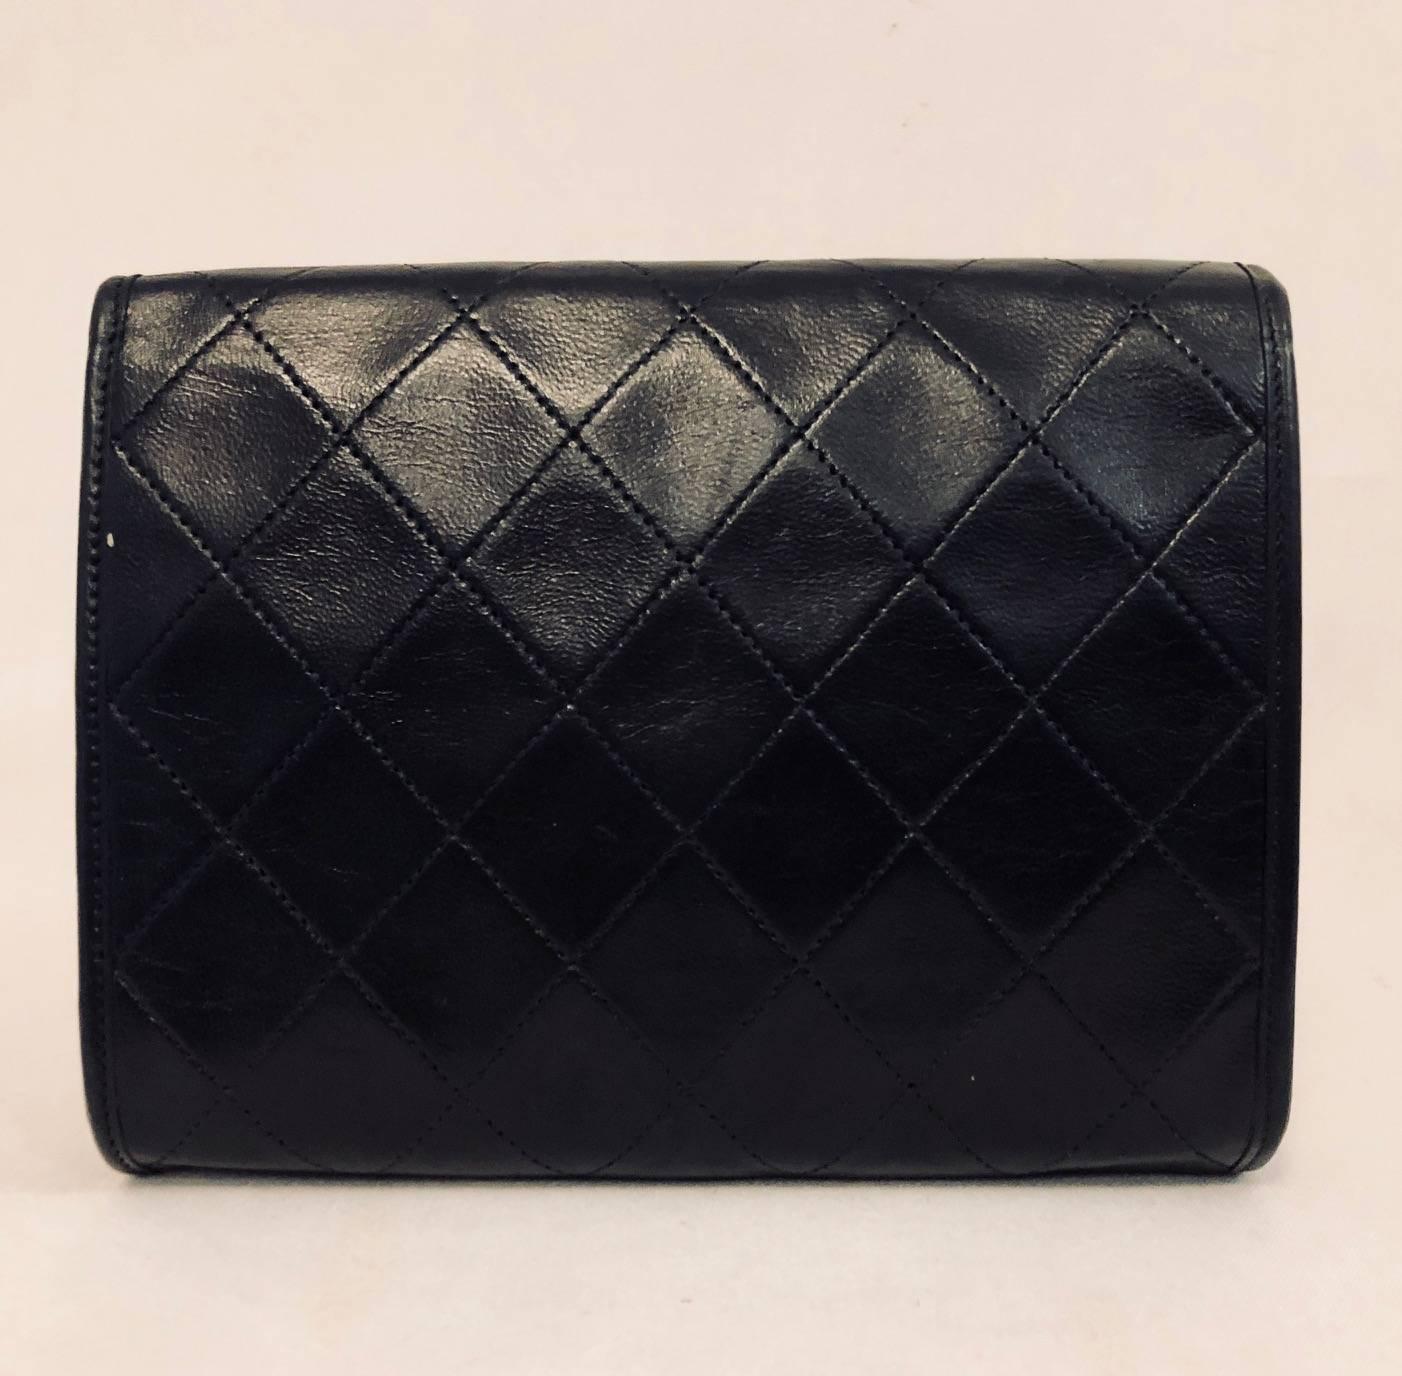 This vintage diamond stitched clutch bag was originally a shoulder style bag from the 1980's, but has since lost its strap.  The inside is lined in a thick black grosgrain and only has one single interior pocket.   It is stamped on the inside, on